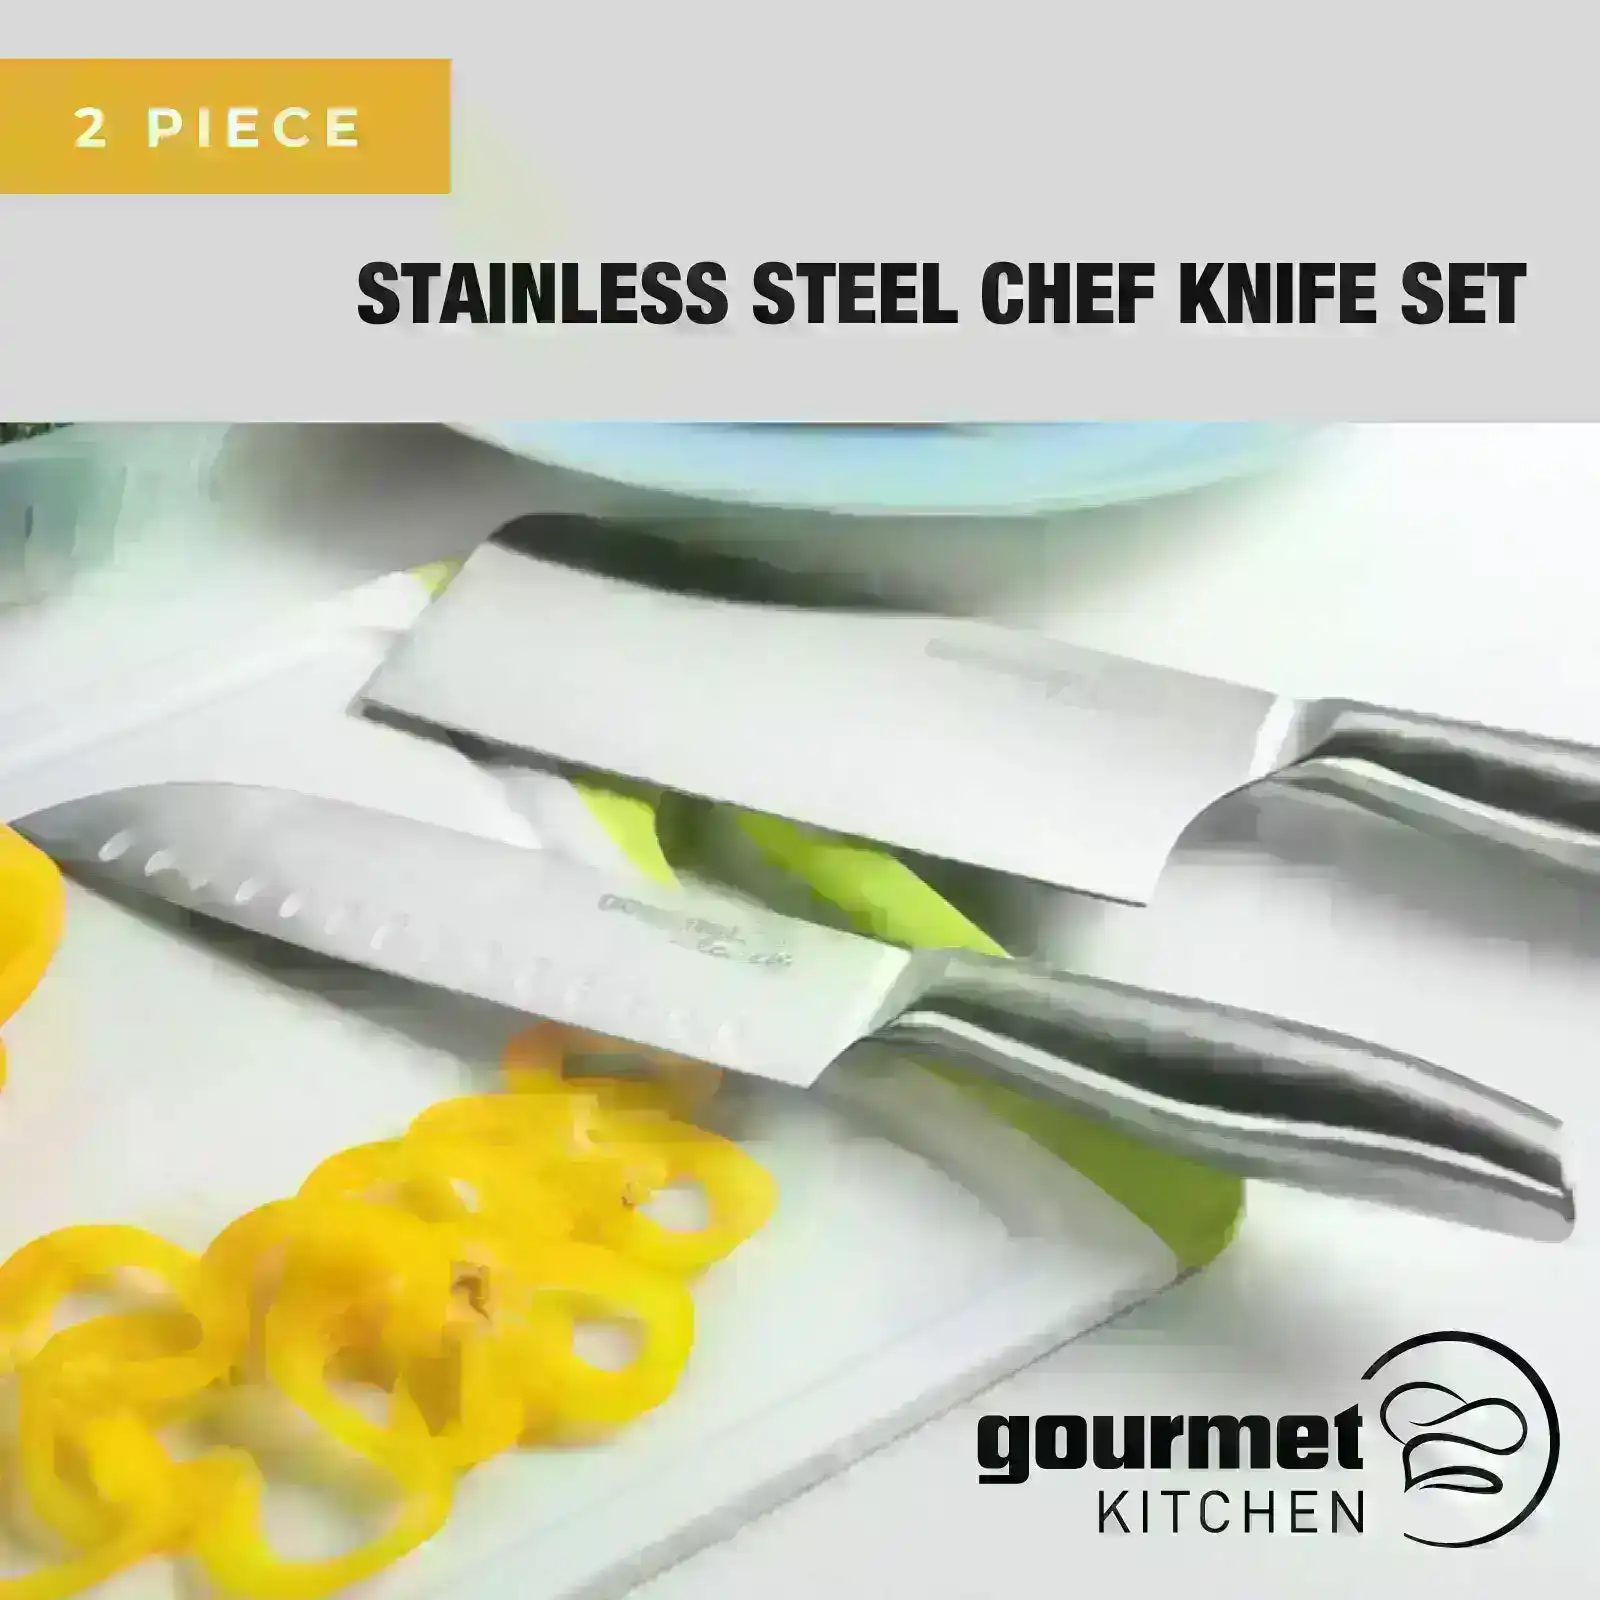 Gourmet Kitchen 2 Piece Stainless Steel Chef Knife Set - Santoku & Clever - Silver